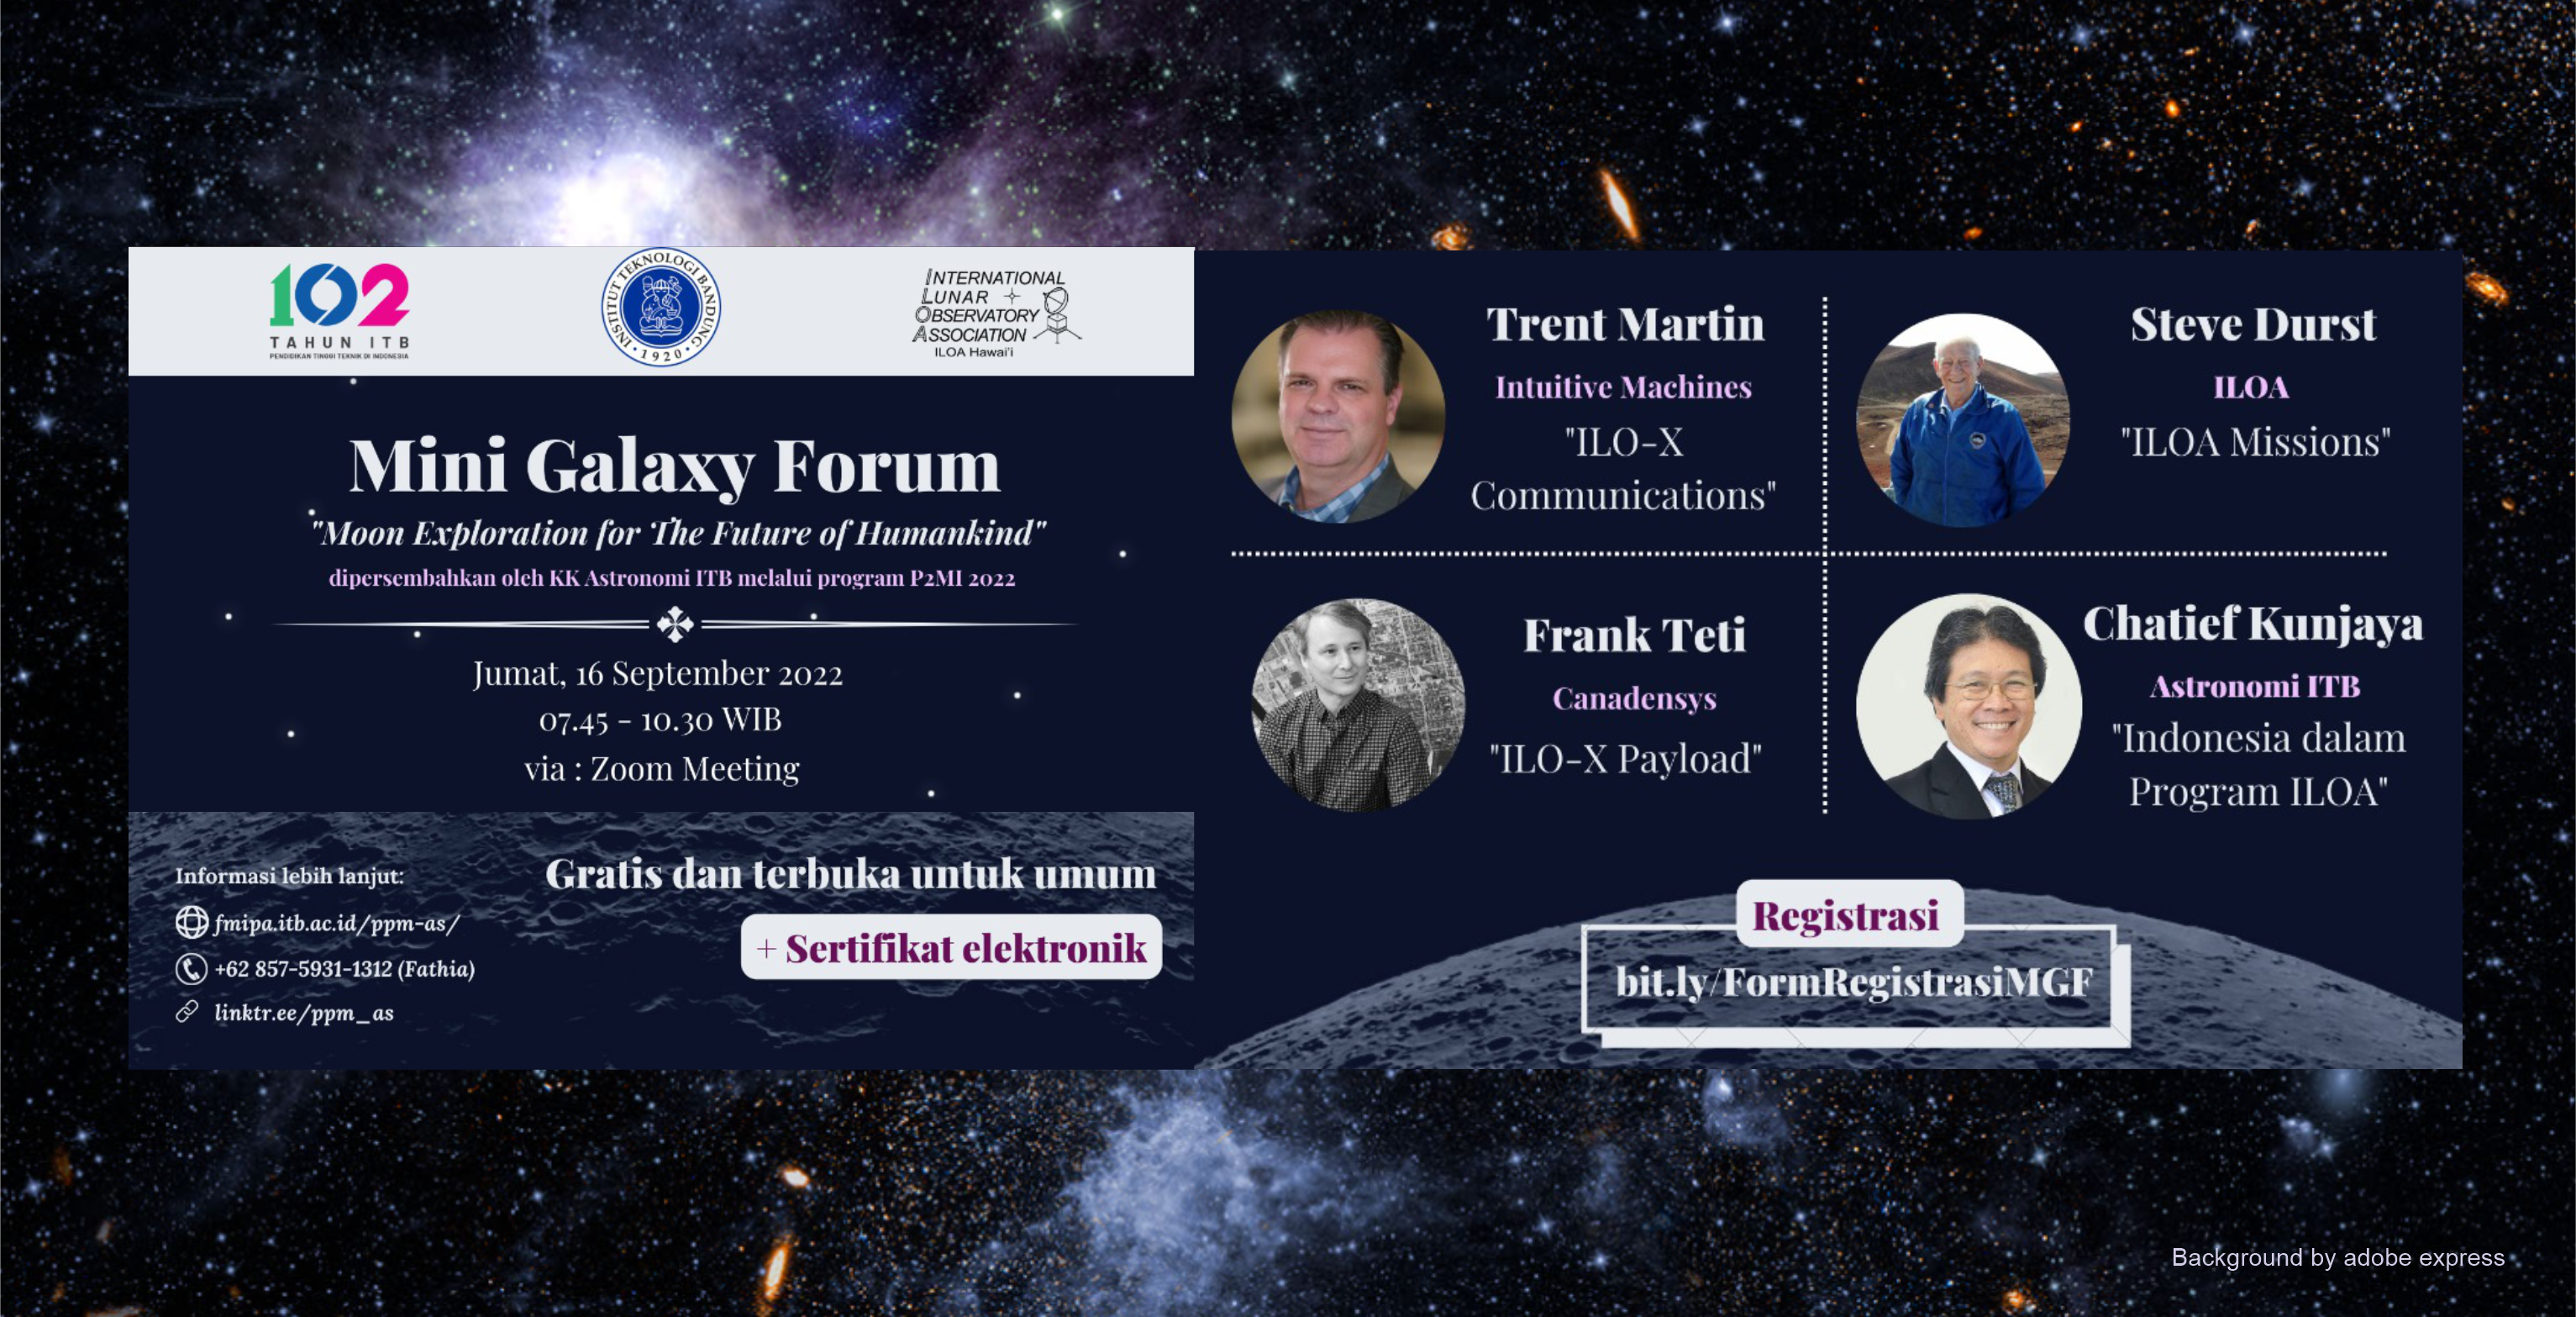 Press Release Galaksi Forum: “Moon Exploration for the Future of Humankind”